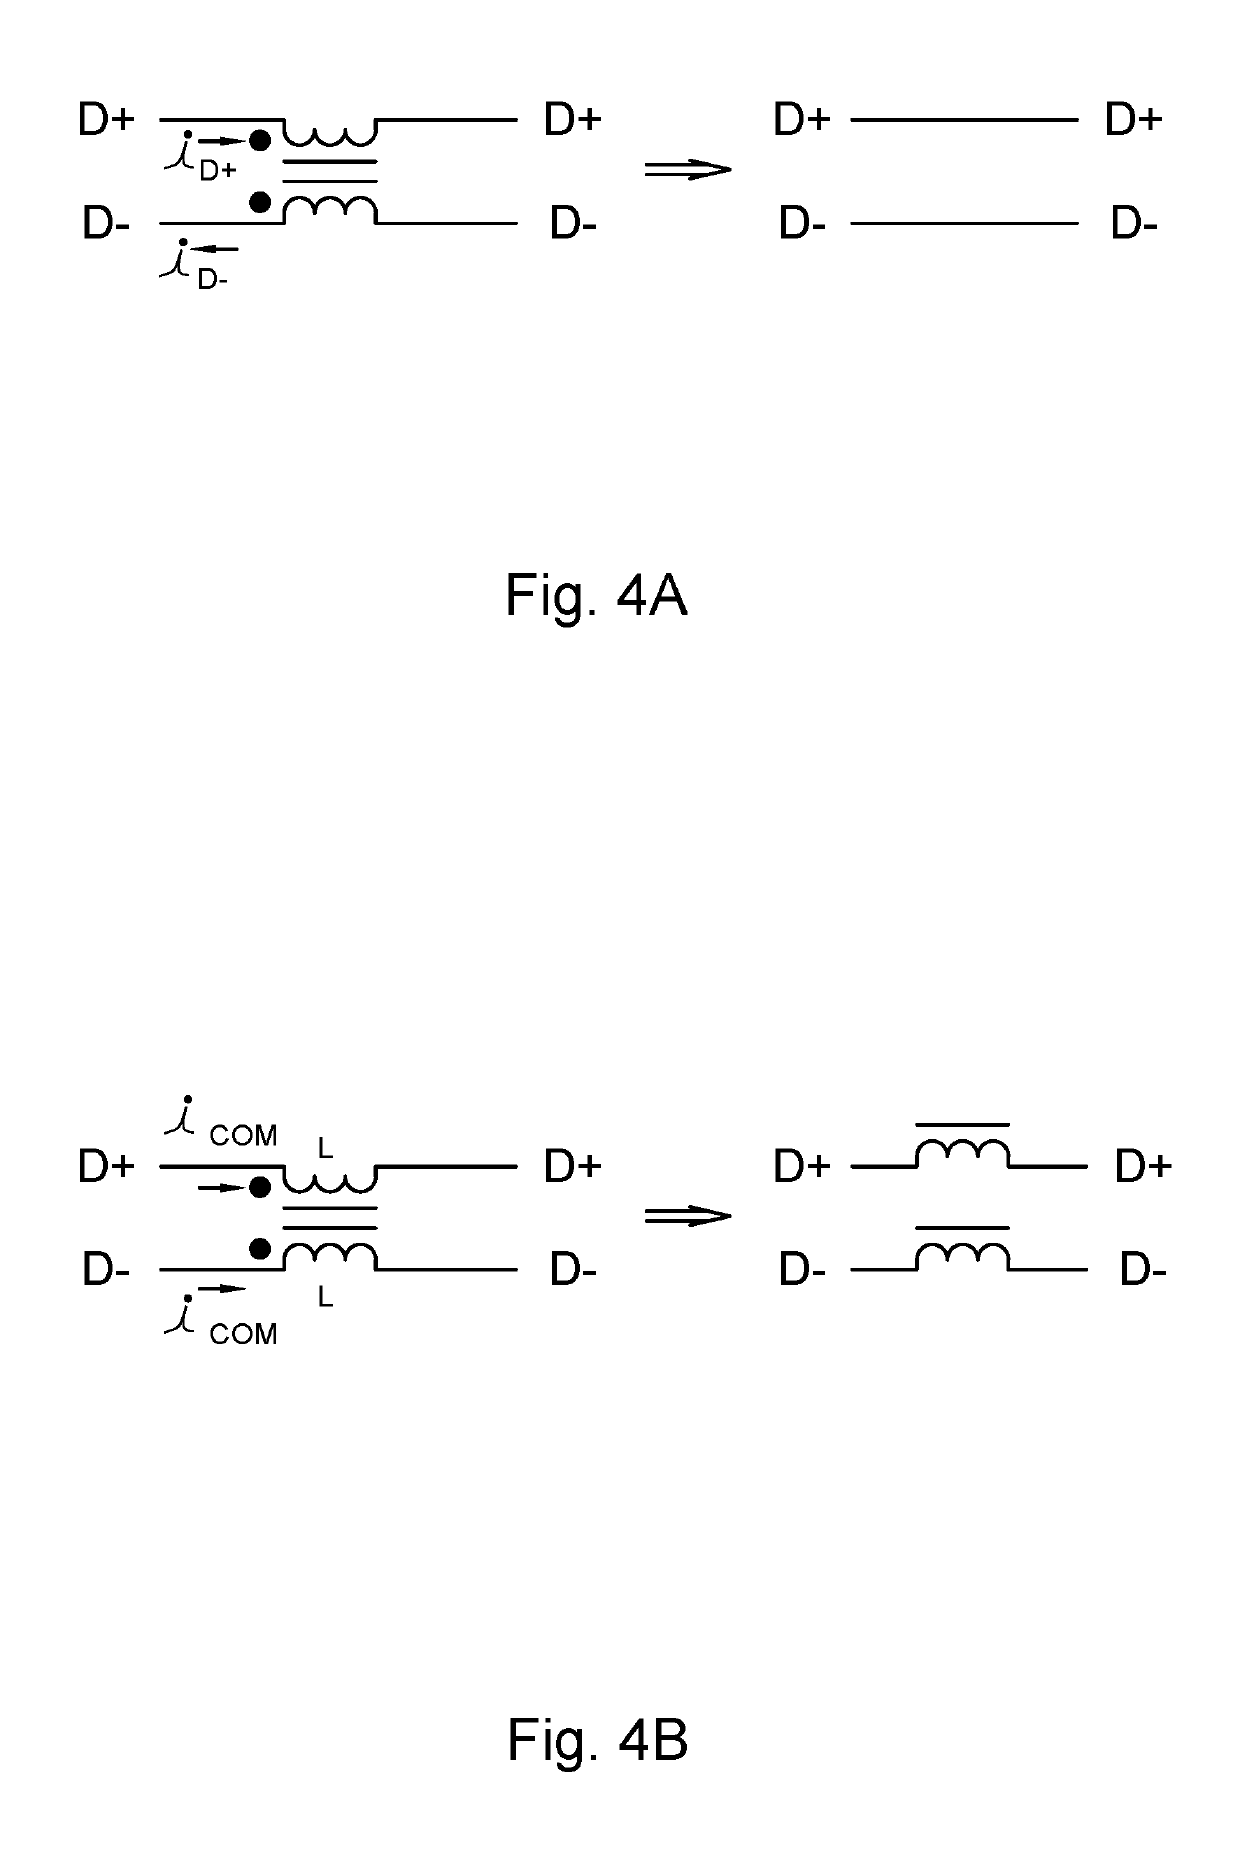 Radiofrequency filter with improved attenuation of common mode signals